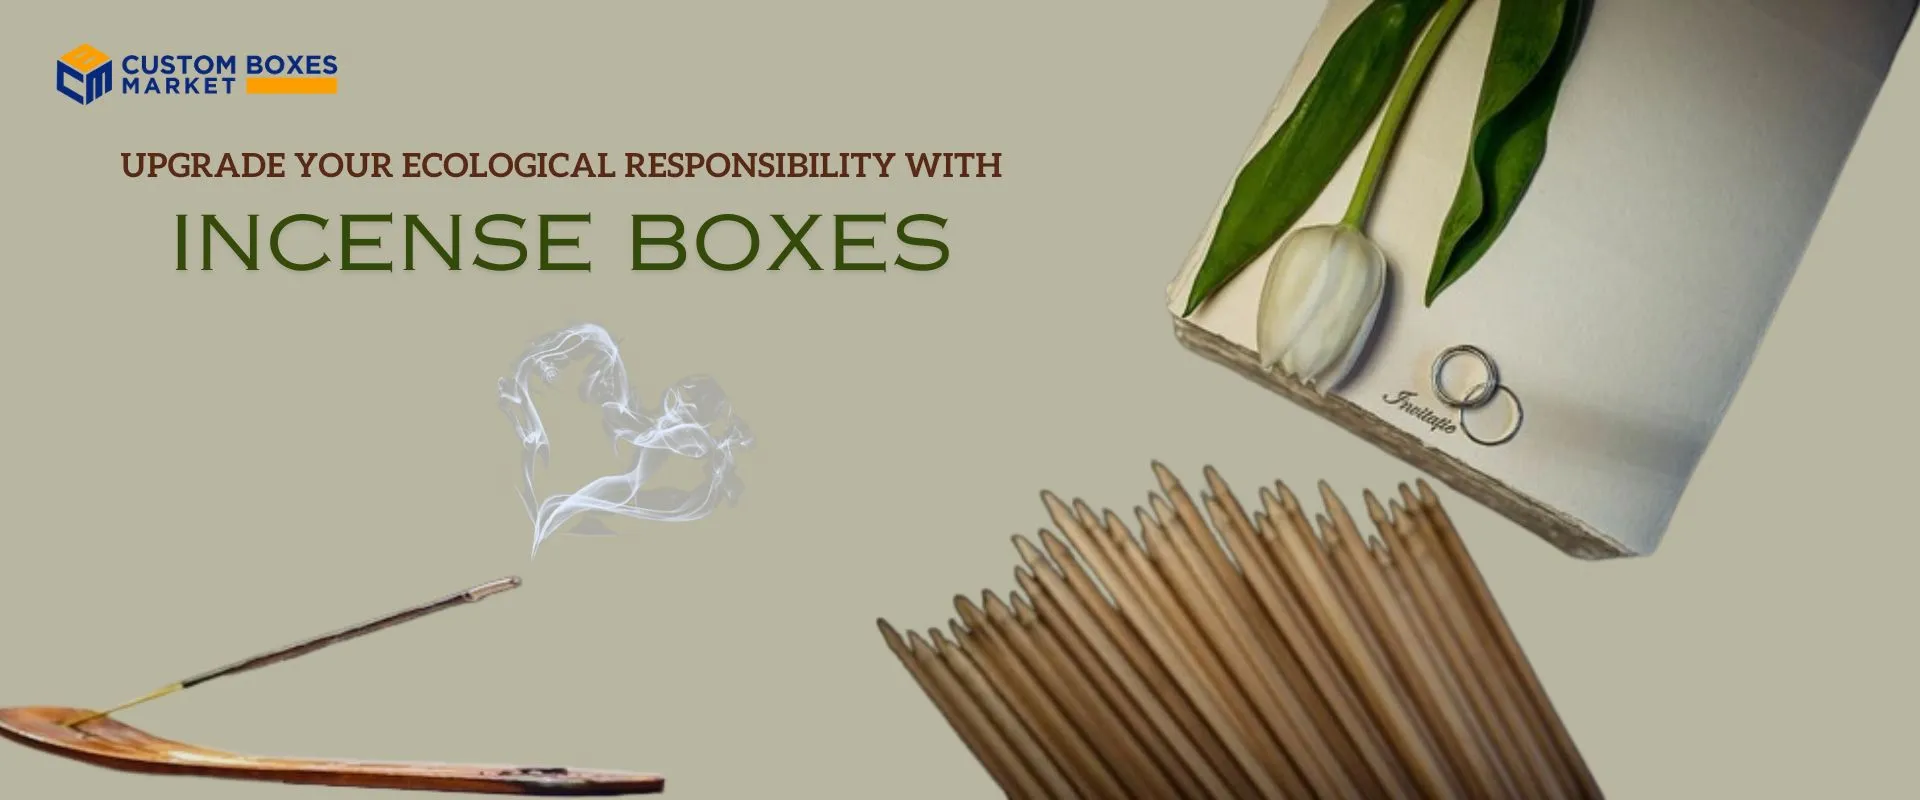 Upgrade-Your-Ecological-Responsibility-With-Incense-Boxes